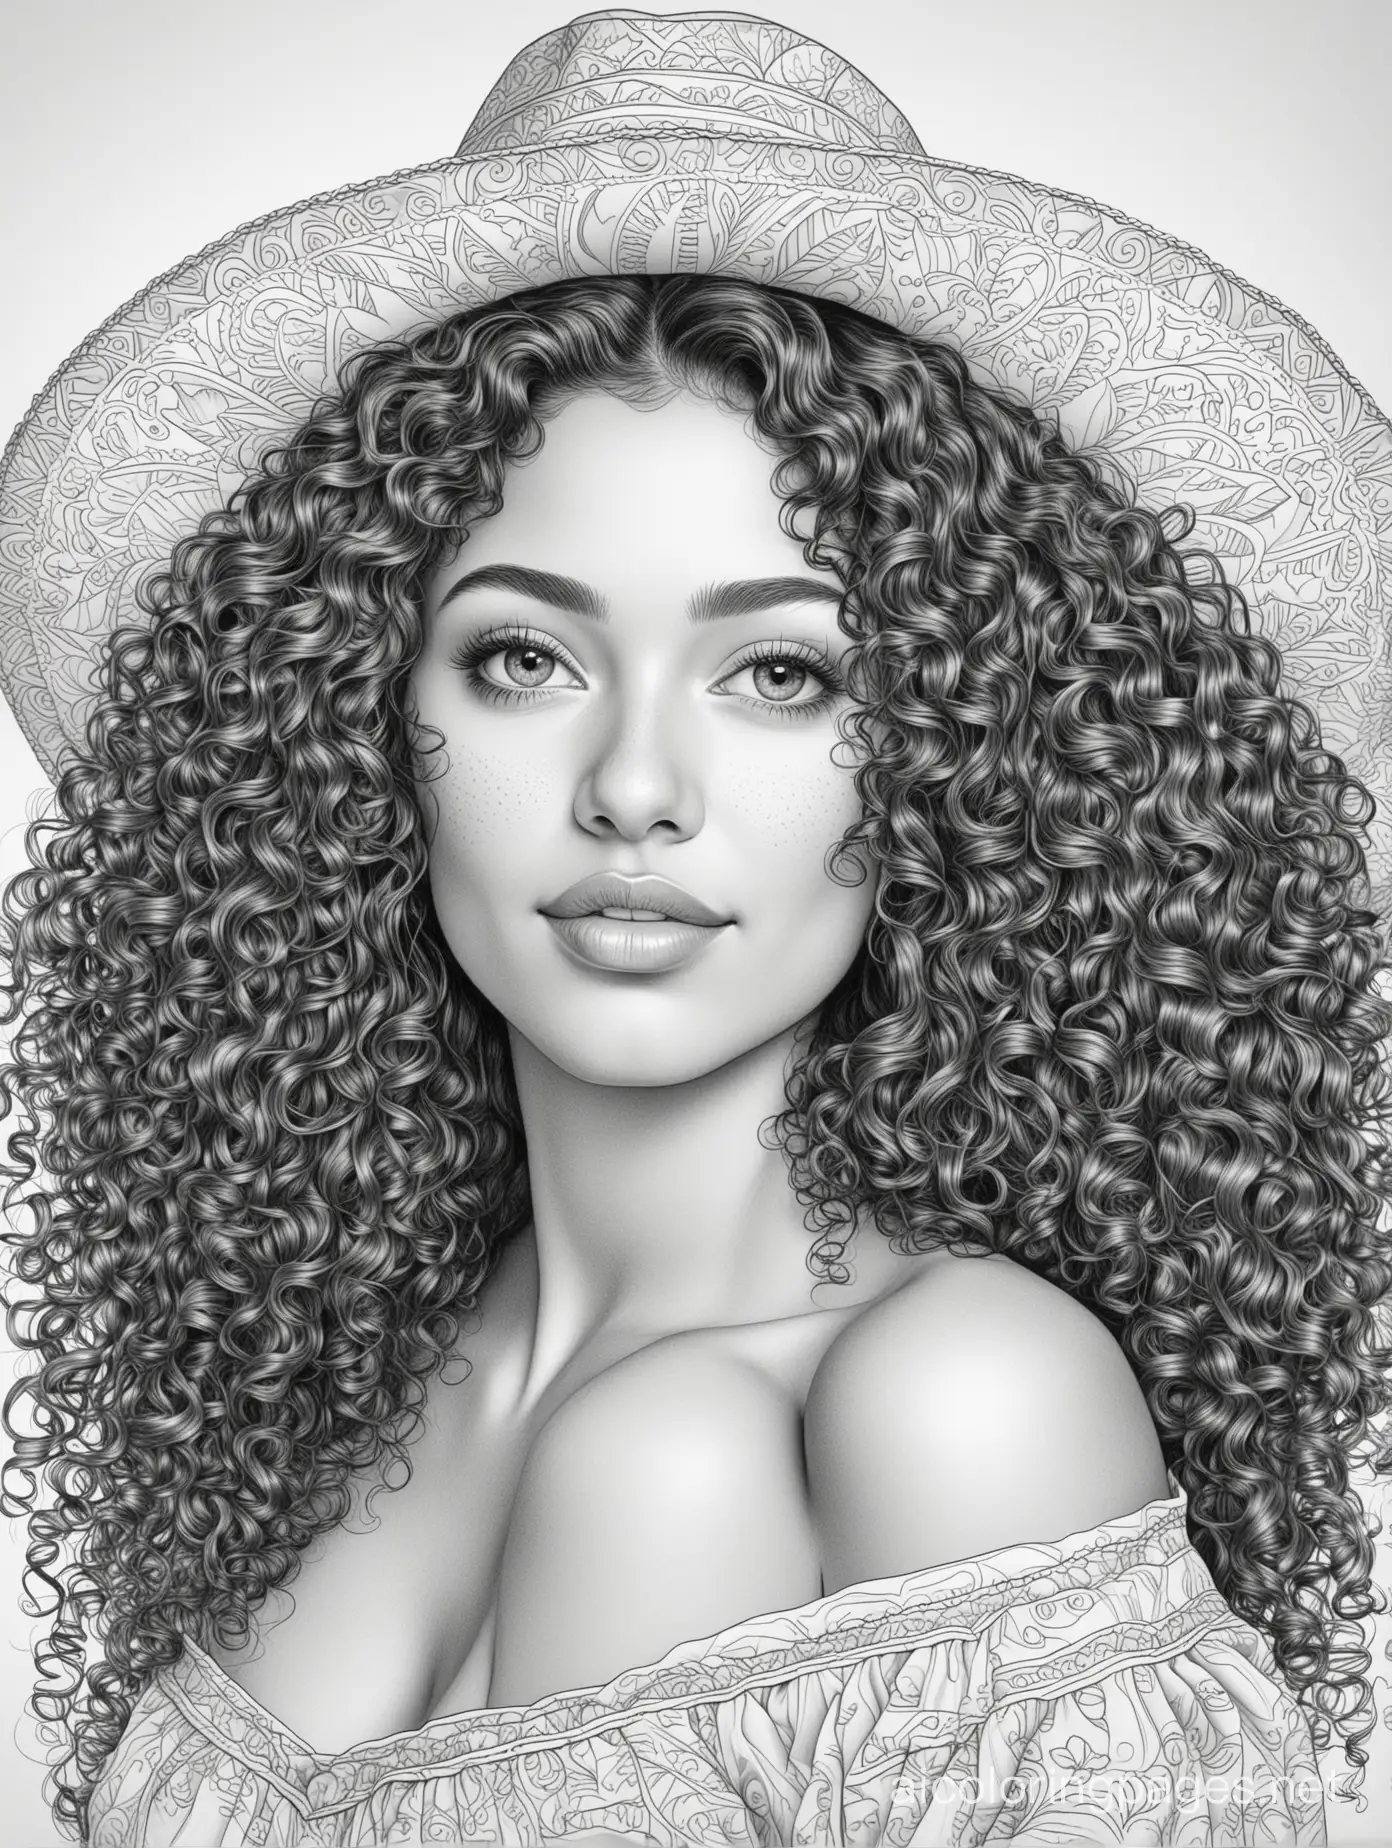 Beautiful Mexican woman with curly hair, Coloring Page, black and white, line art, white background, Simplicity, Ample White Space. The background of the coloring page is plain white to make it easy for young children to color within the lines. The outlines of all the subjects are easy to distinguish, making it simple for kids to color without too much difficulty